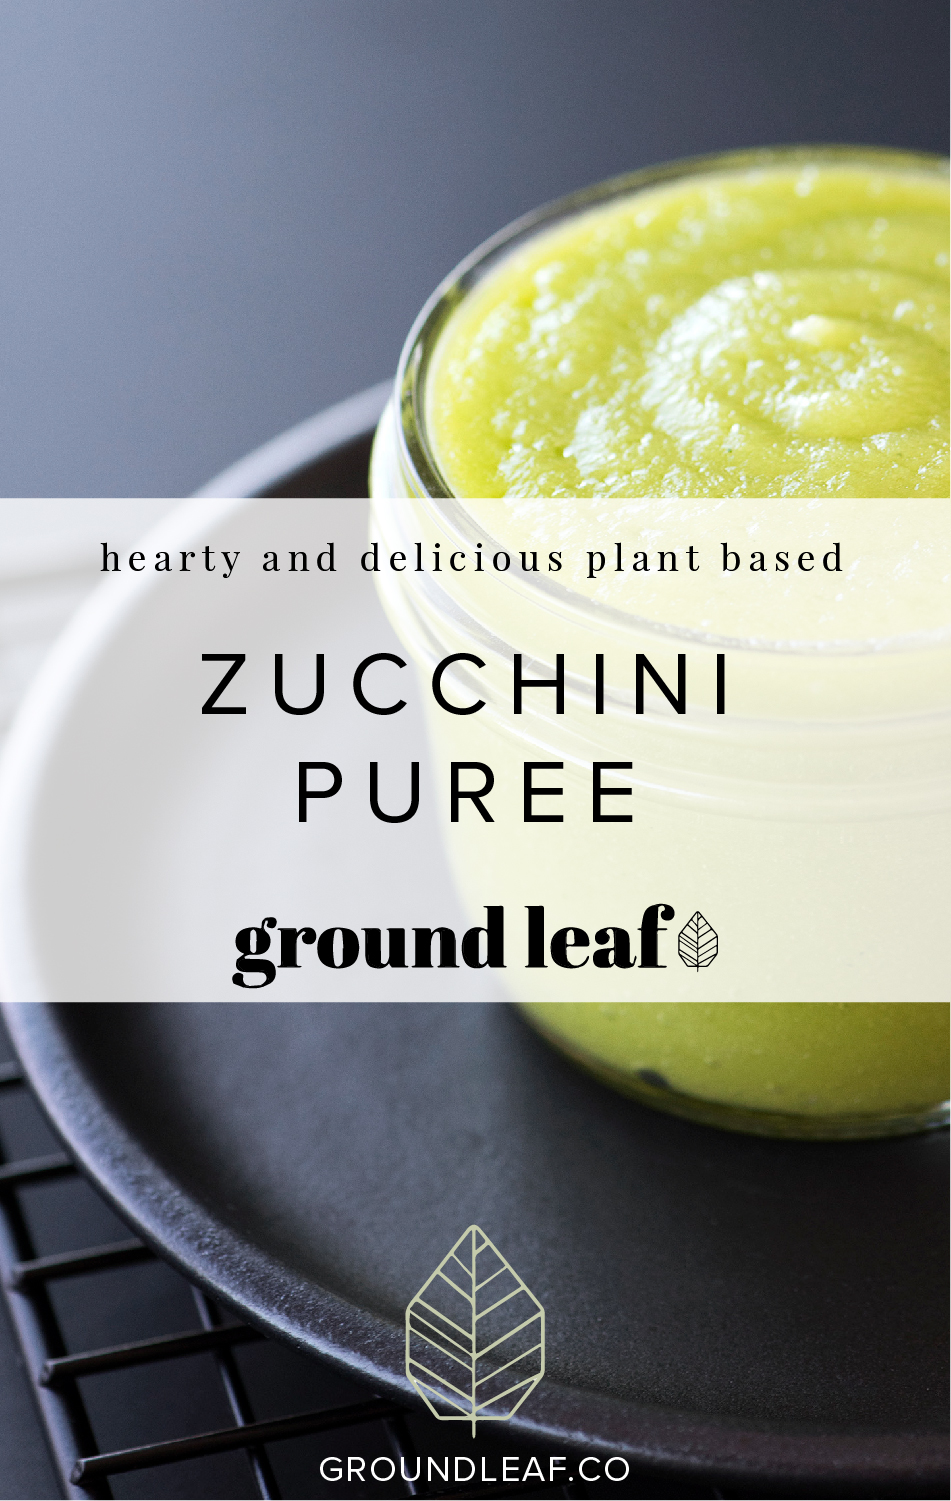 Learn how to make an easy and delicious zucchini puree. | groundleaf.co